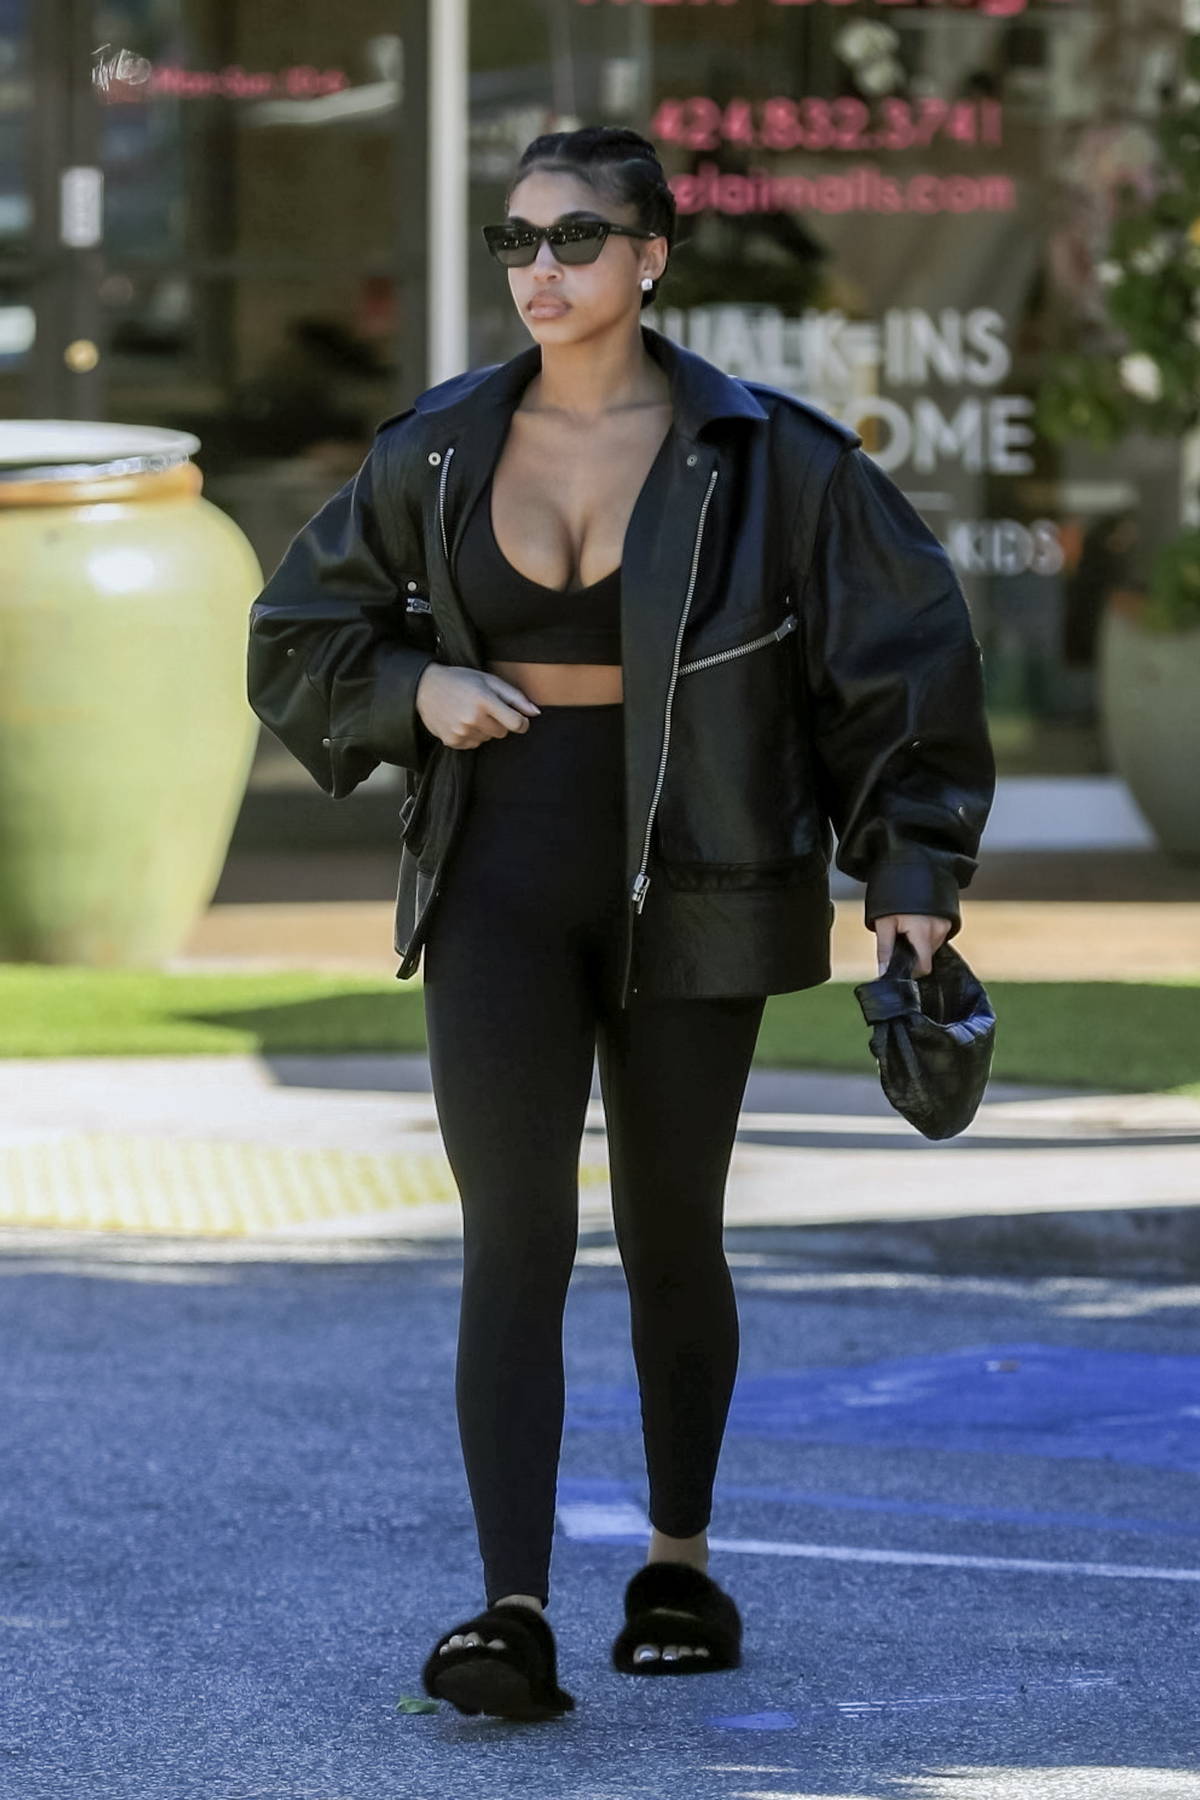 Lori Harvey sports a black sports bra and leggings with leather jacket while stopping for a post-workout smoothie in Los Angeles